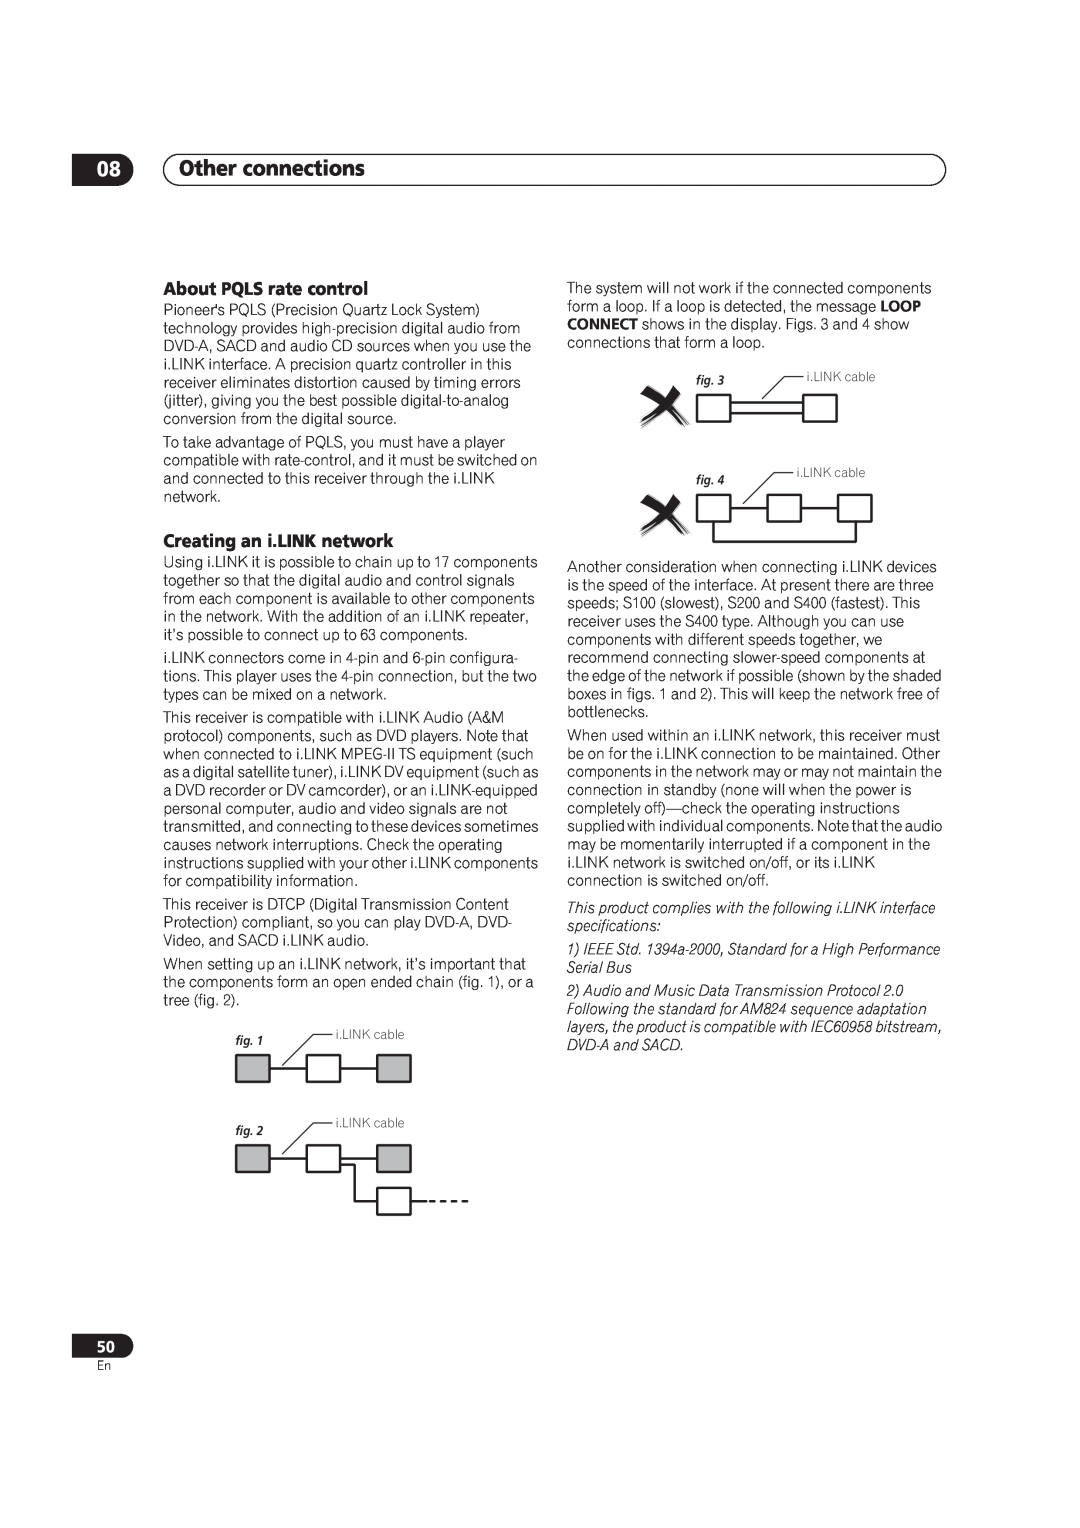 Pioneer VSX-AX4AVi-S, VSX-AX2AV-S manual About PQLS rate control, Creating an i.LINK network, Other connections 